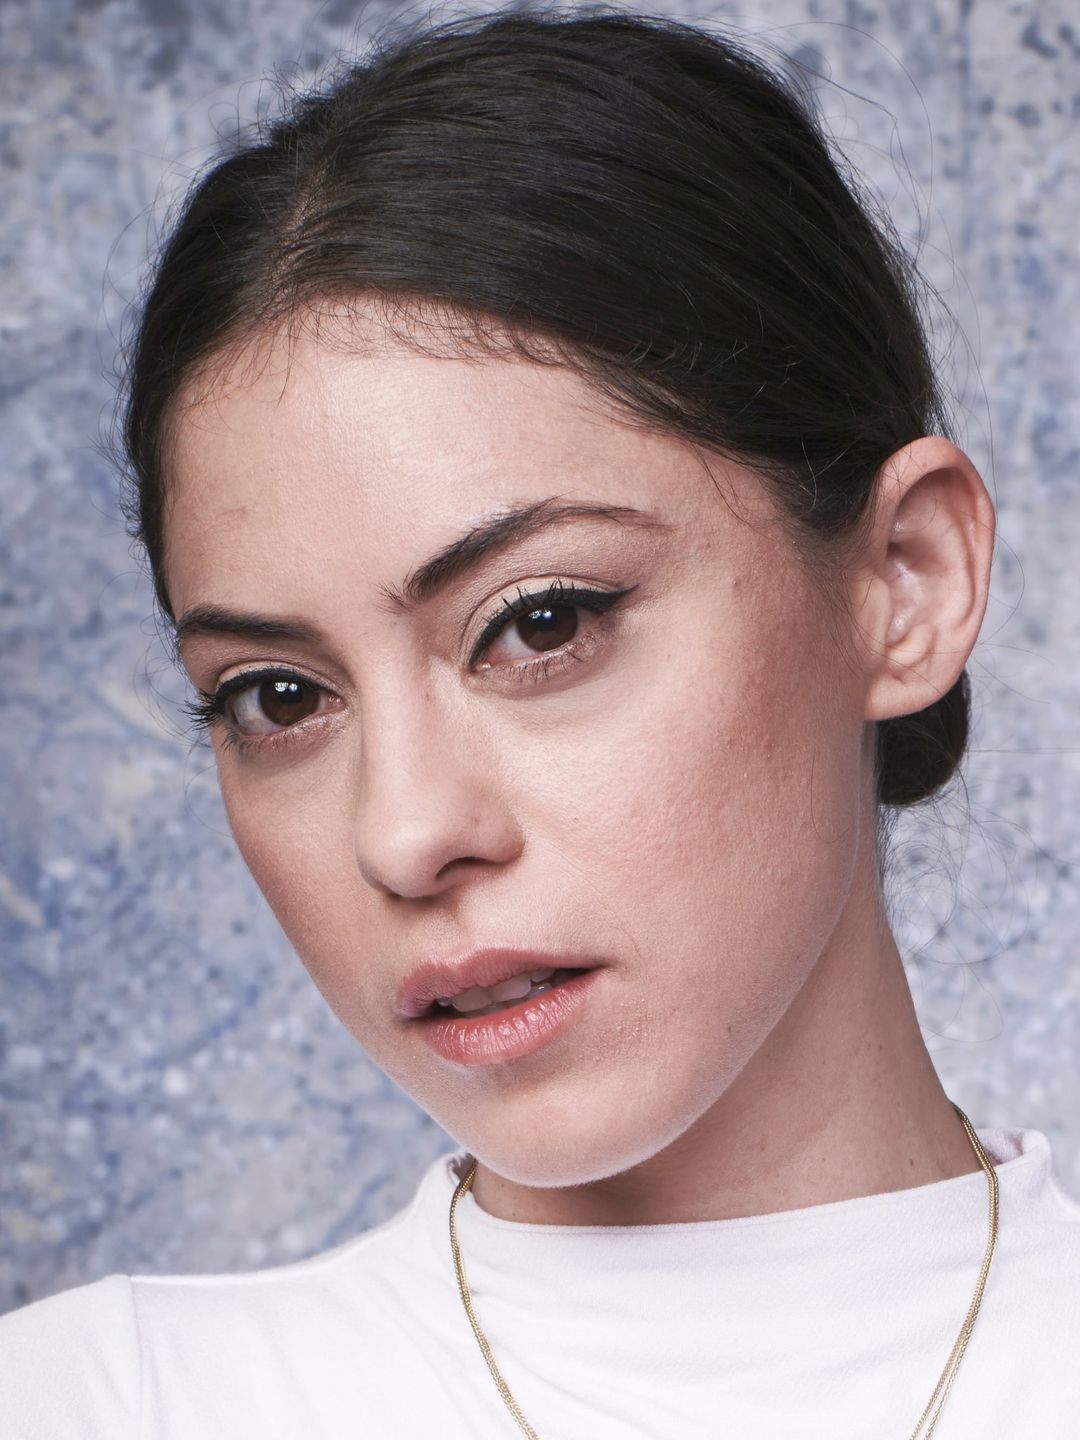 Rosa Salazar who is her father